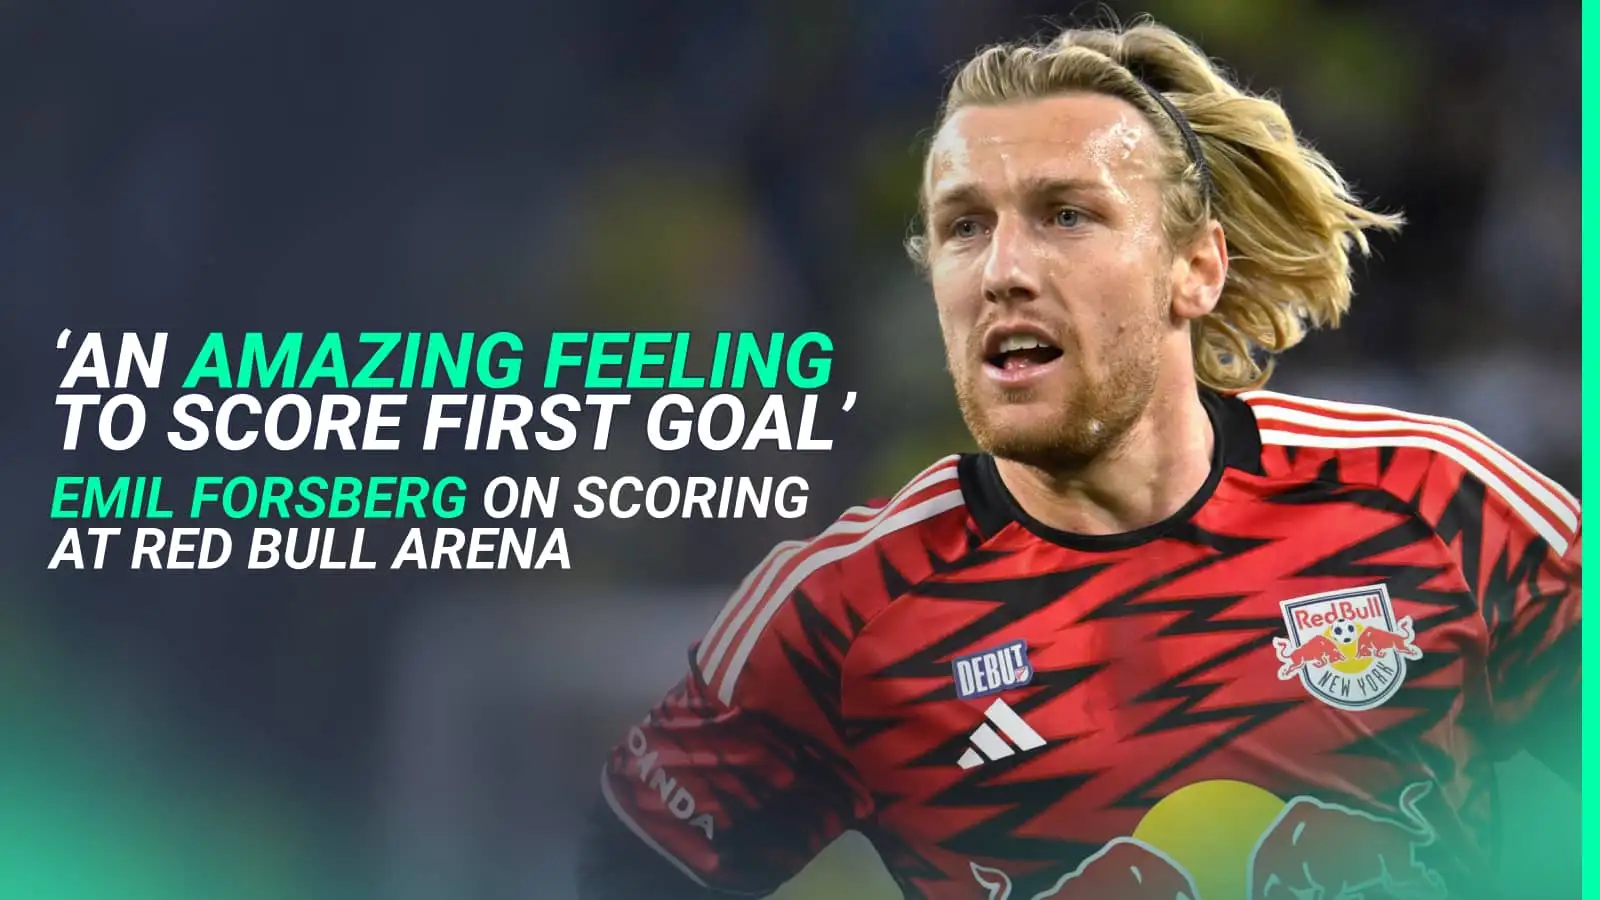 New York Red Bulls star Forsberg ‘saved’ first goal ‘for home’ as fans treated to top display